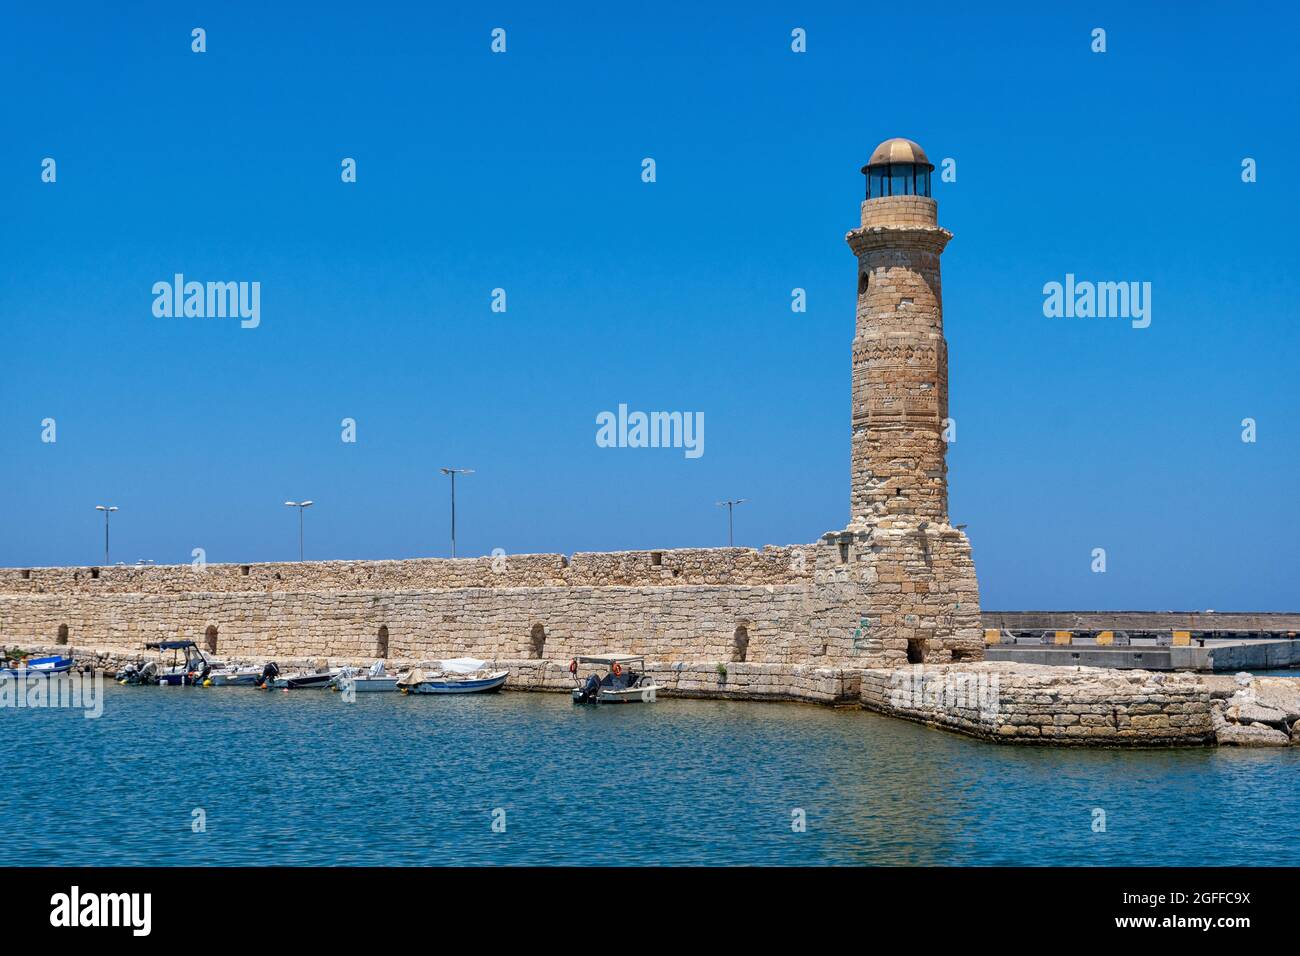 The historic lighthouse in the port of Rethymno on the Greek island of Crete Stock Photo